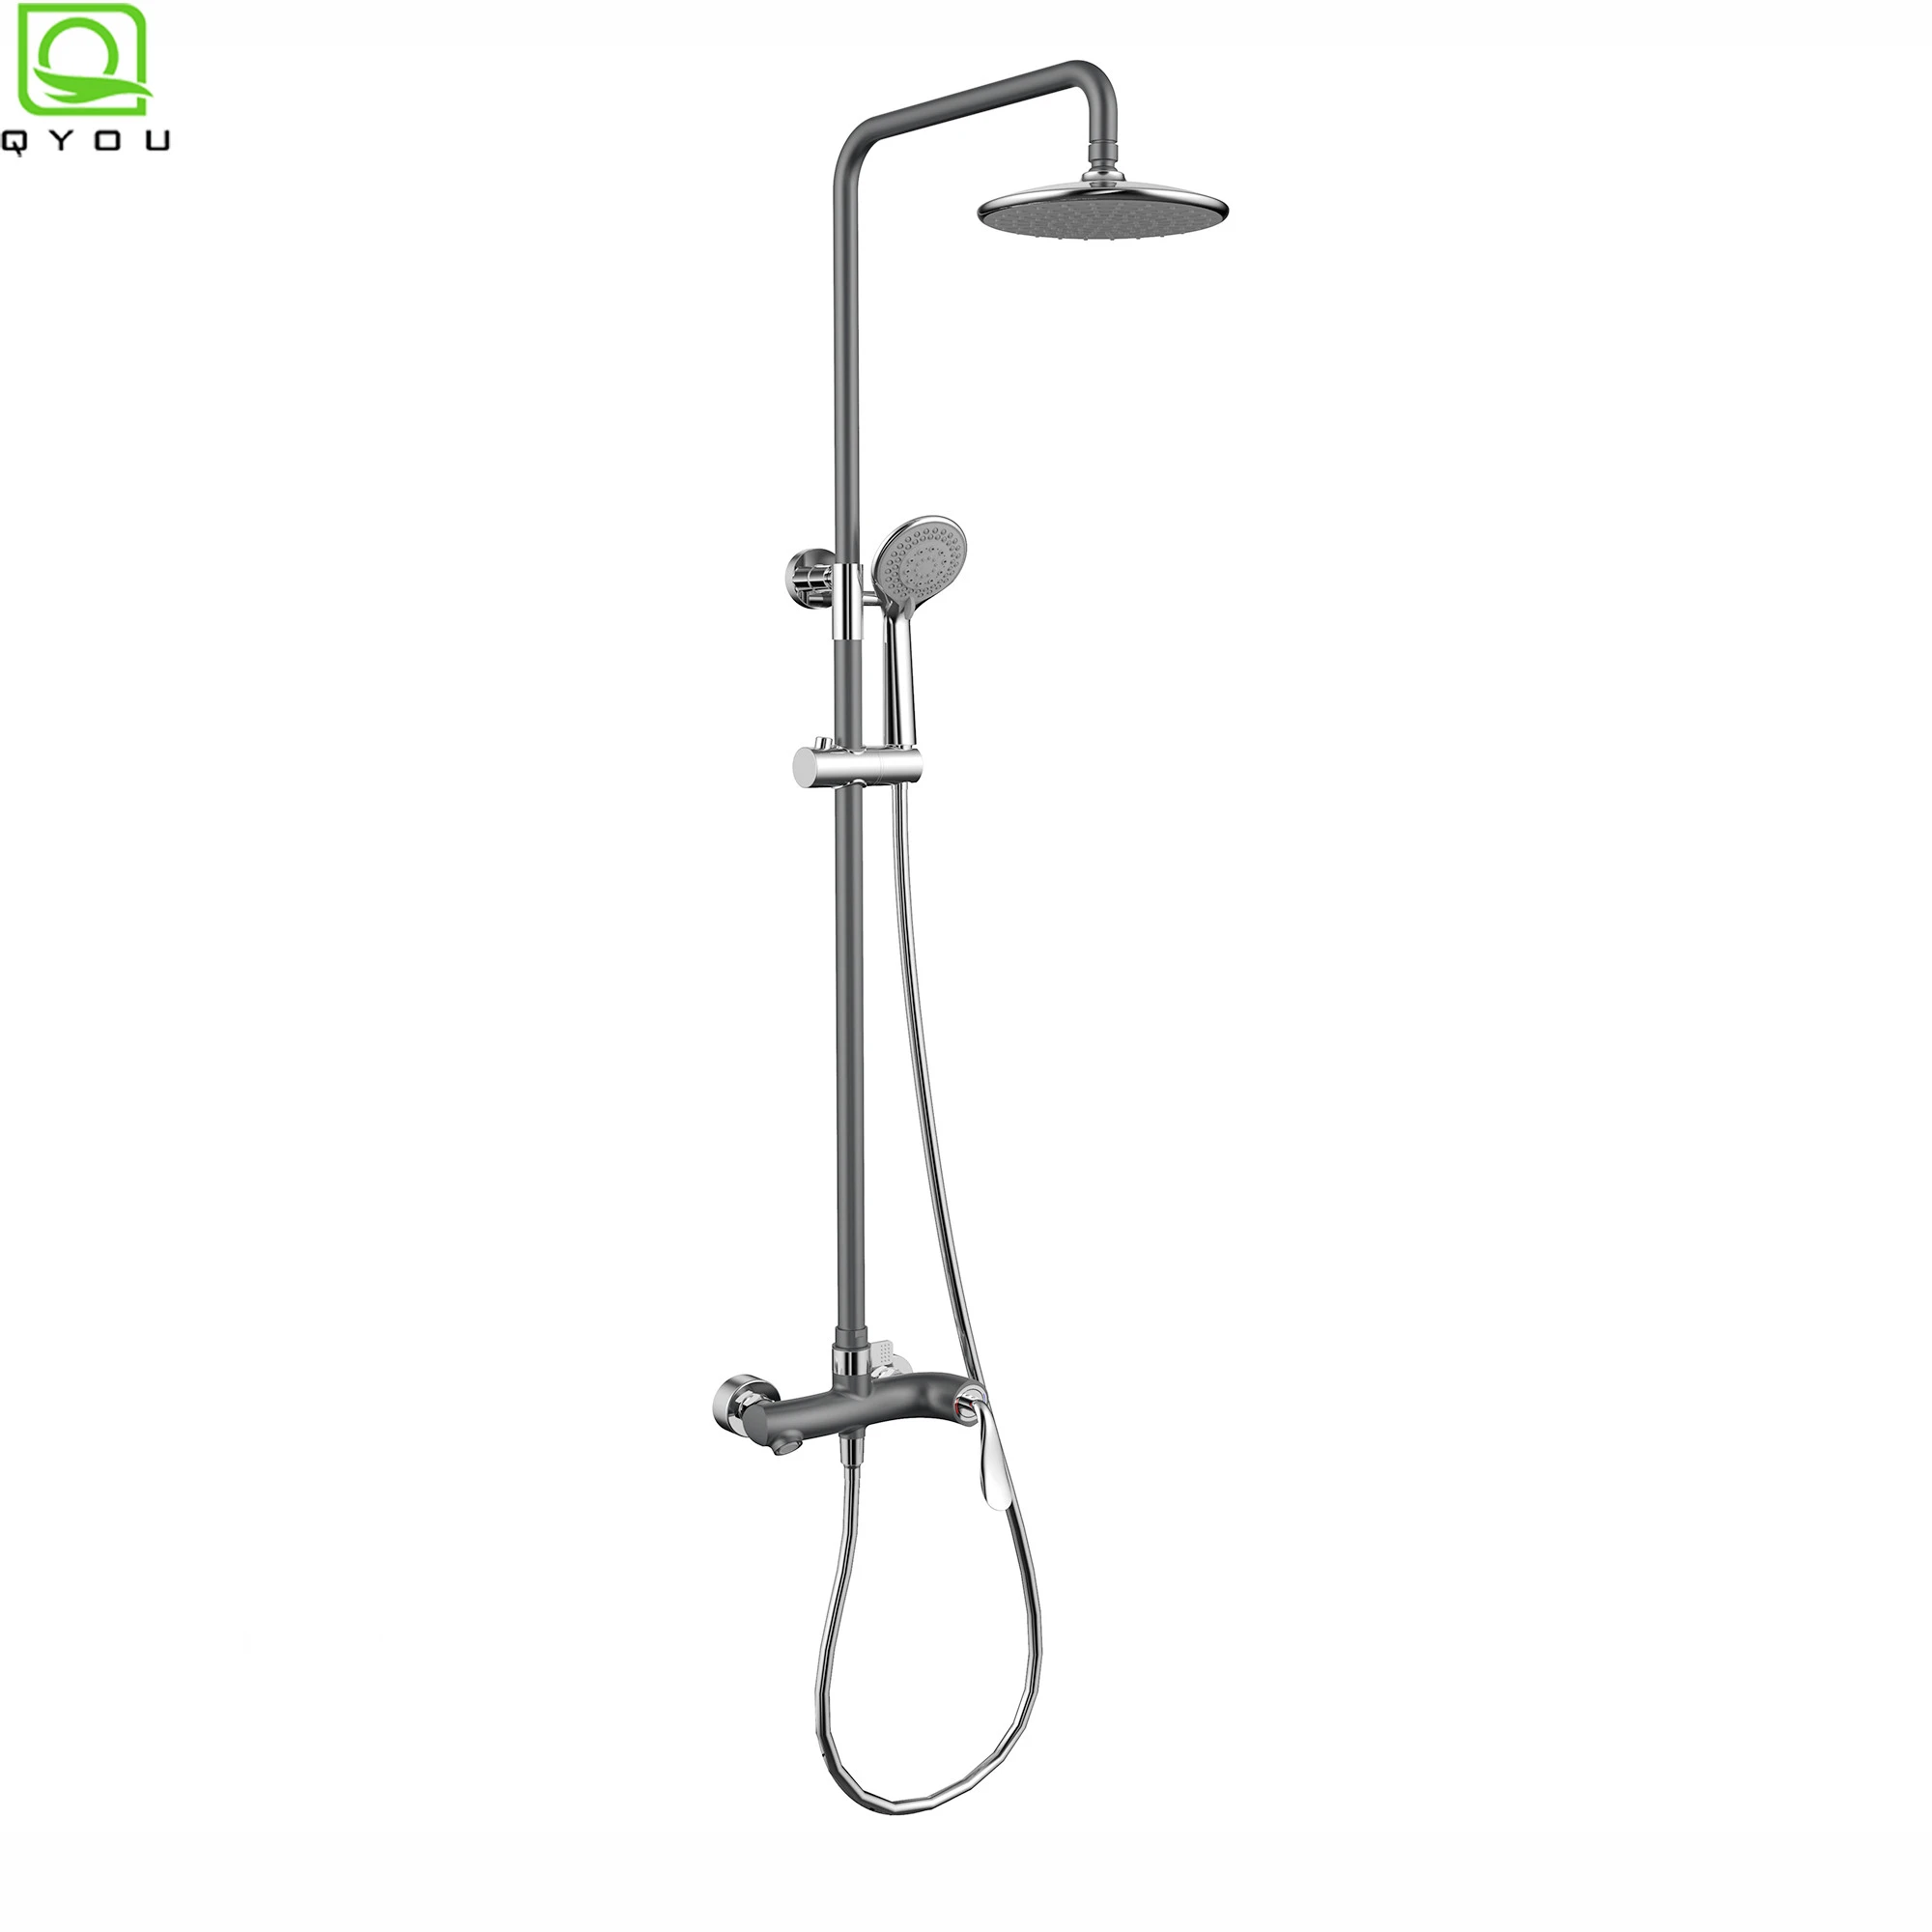 Kaiping Famous trademark three functions Brass Chrome surface bathroom hot and cold rain shower set